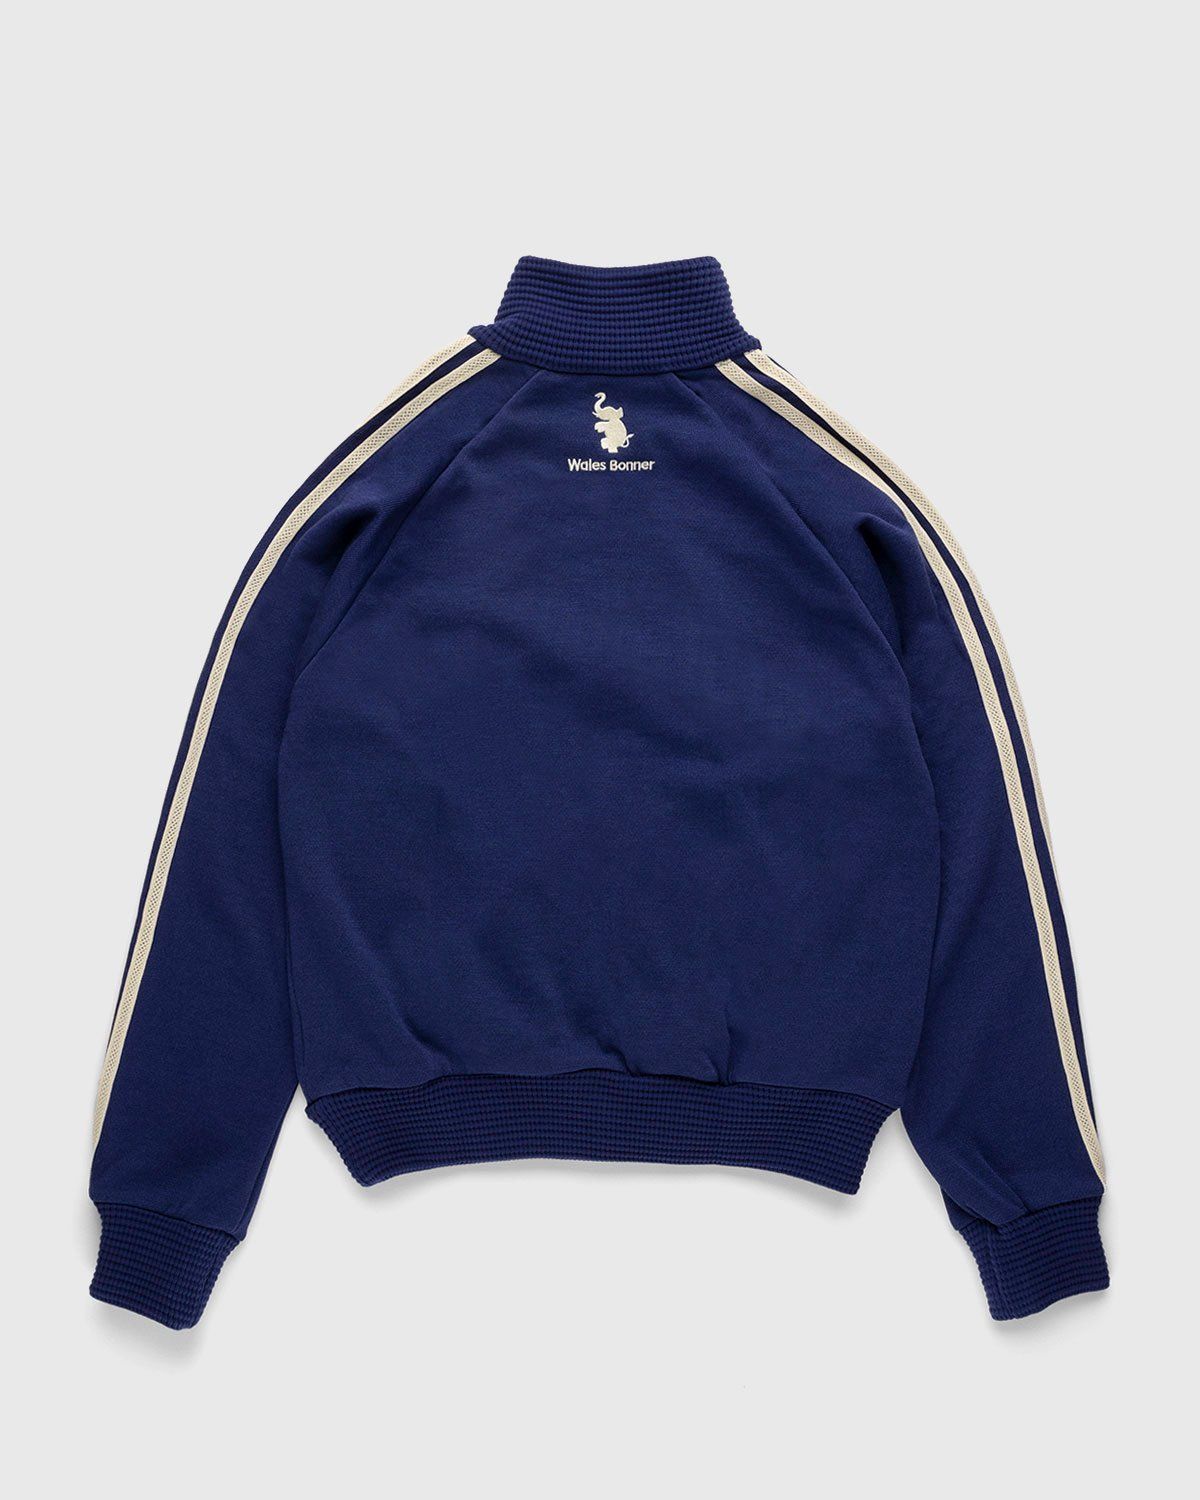 Adidas x Wales Bonner – 80s Track Top Night Sky - Outerwear - Blue - Image 2